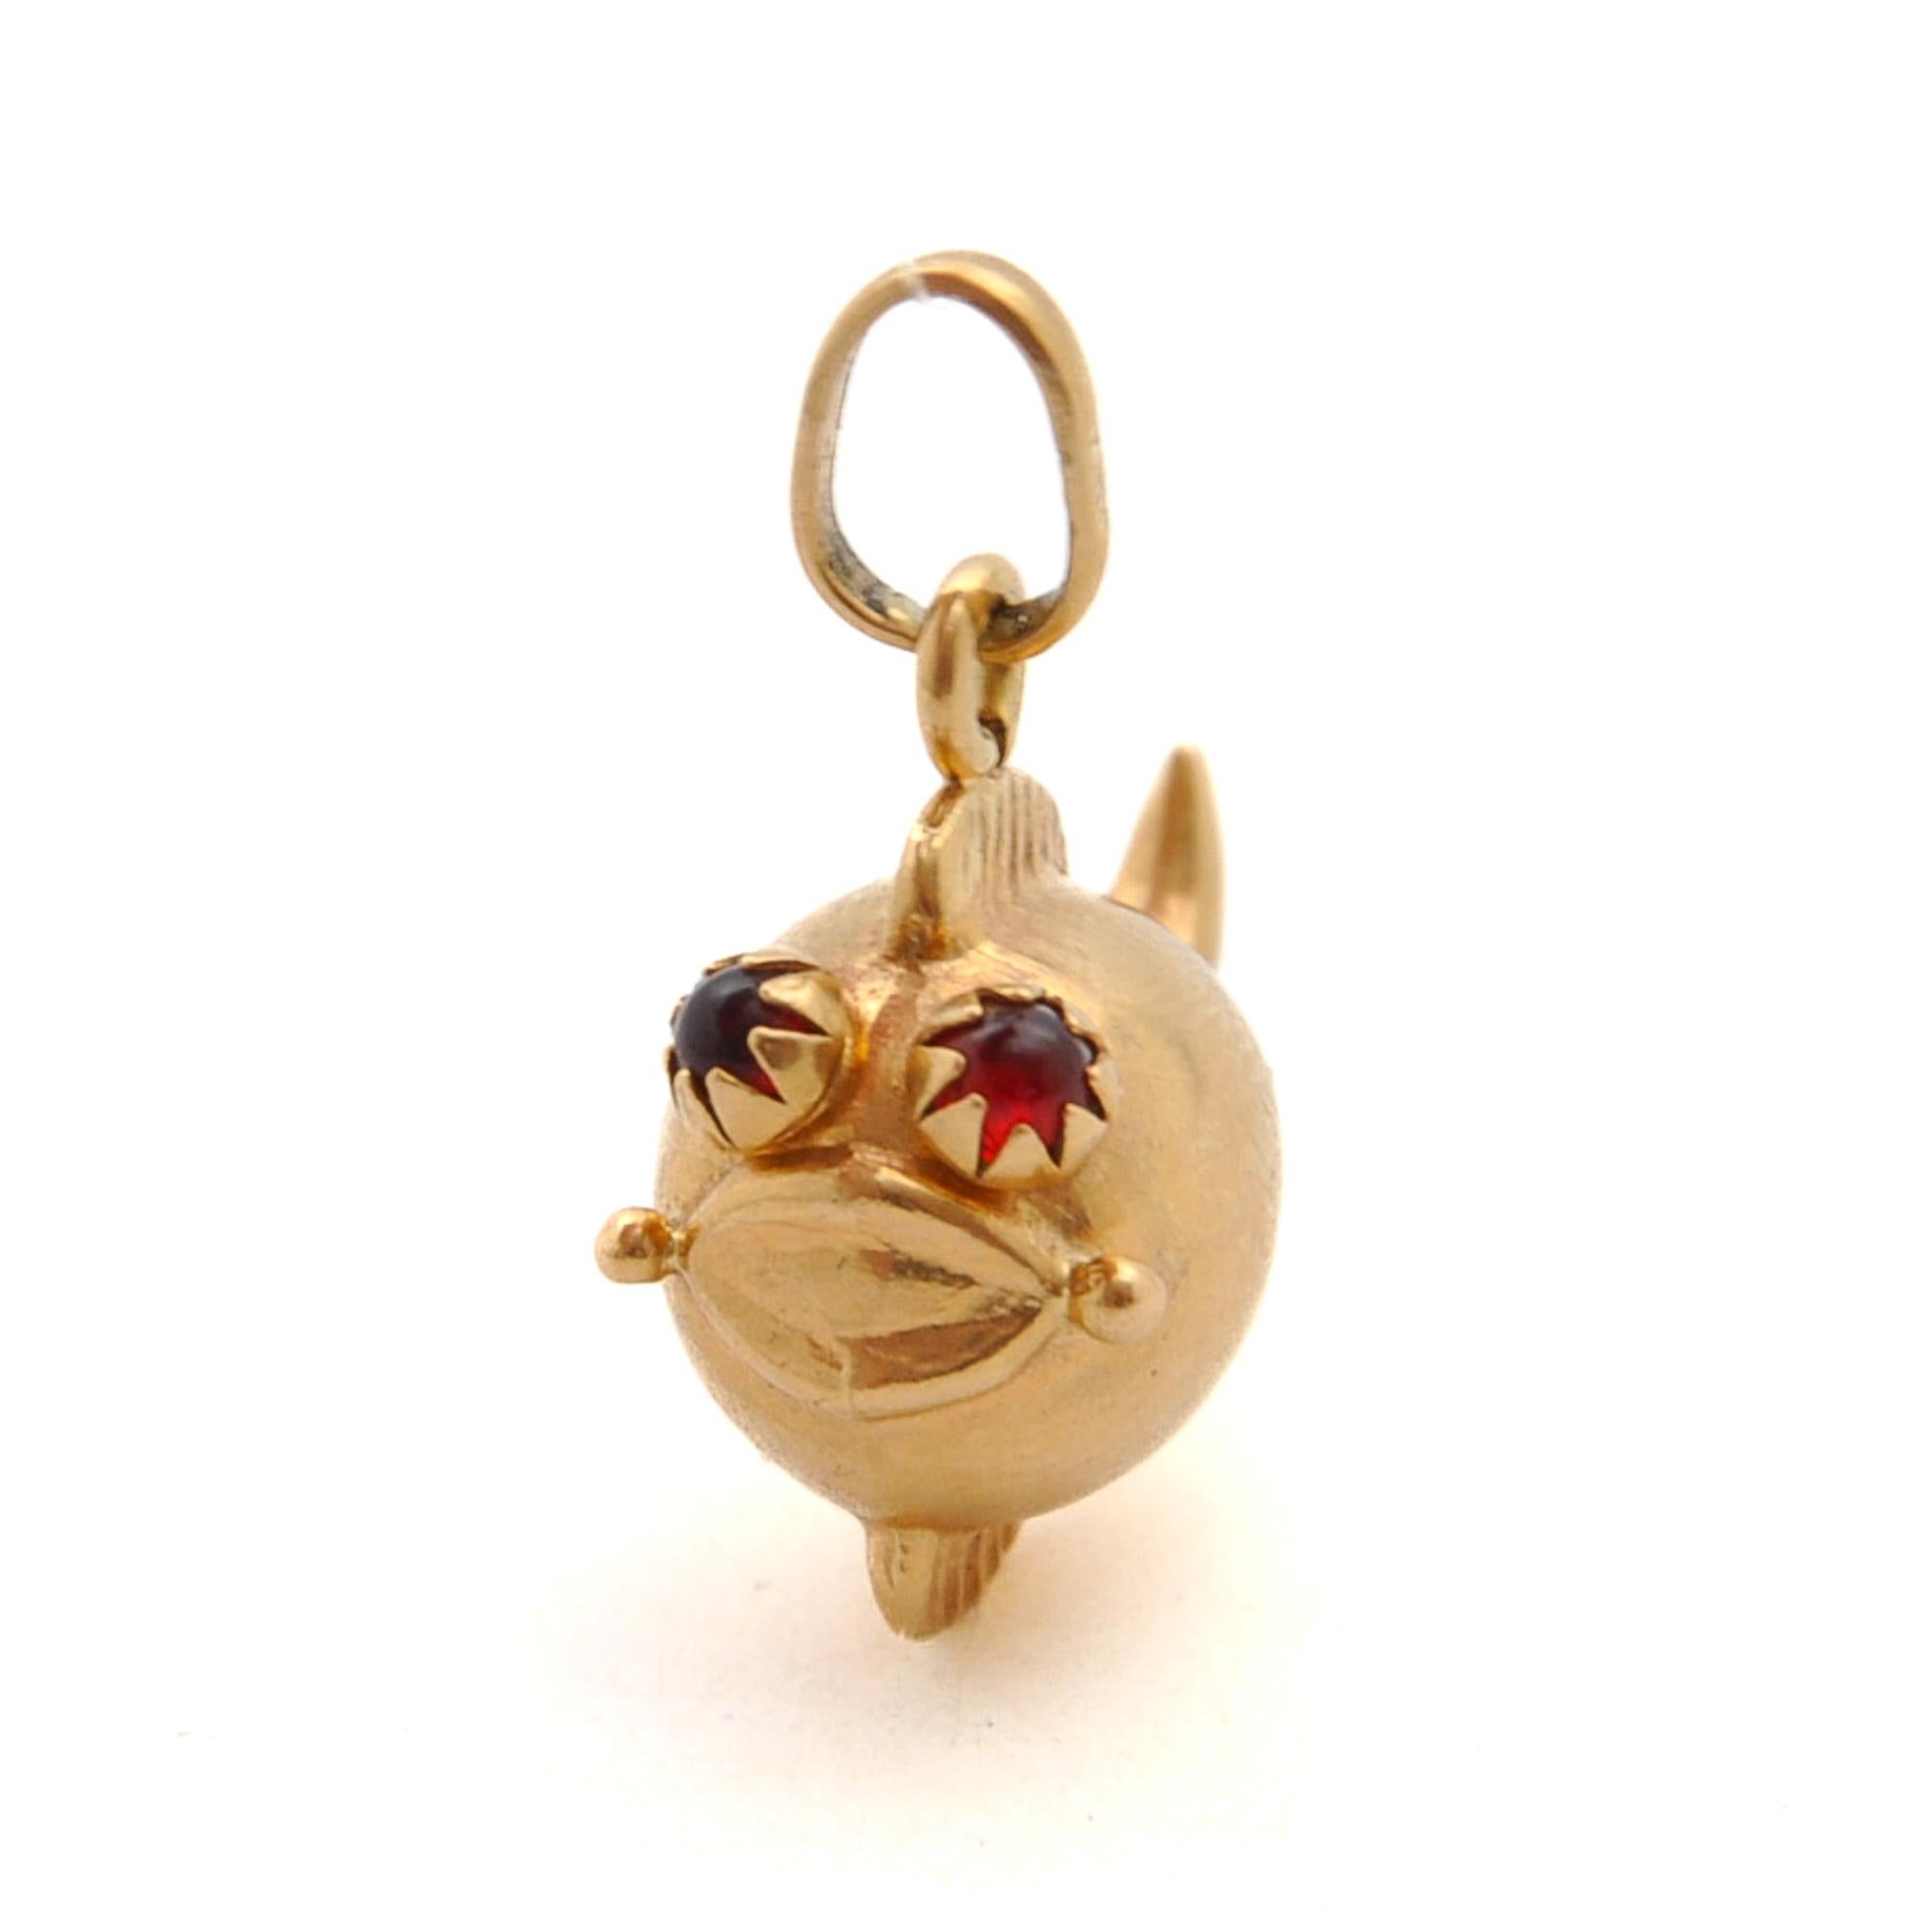 An 18 karat yellow gold puffer blow fish charm pendant. The fish is lovely and created with red stone eyes, the puffy body is highly polished, while the fins and tail are beautiful engraved and detailed. 

Collect your own charms as wearable